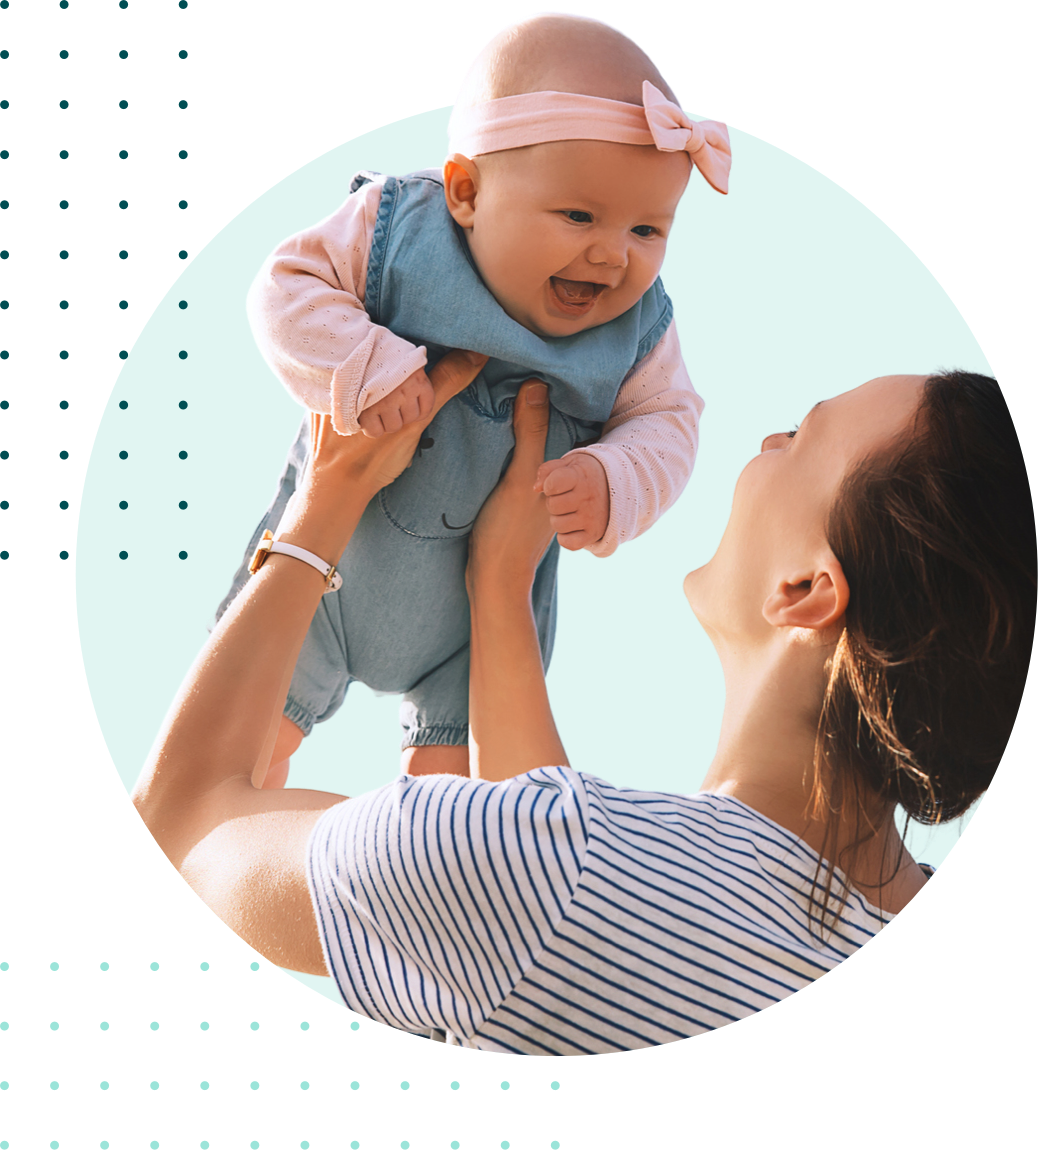 Smiling woman holding her laughing baby up over her head